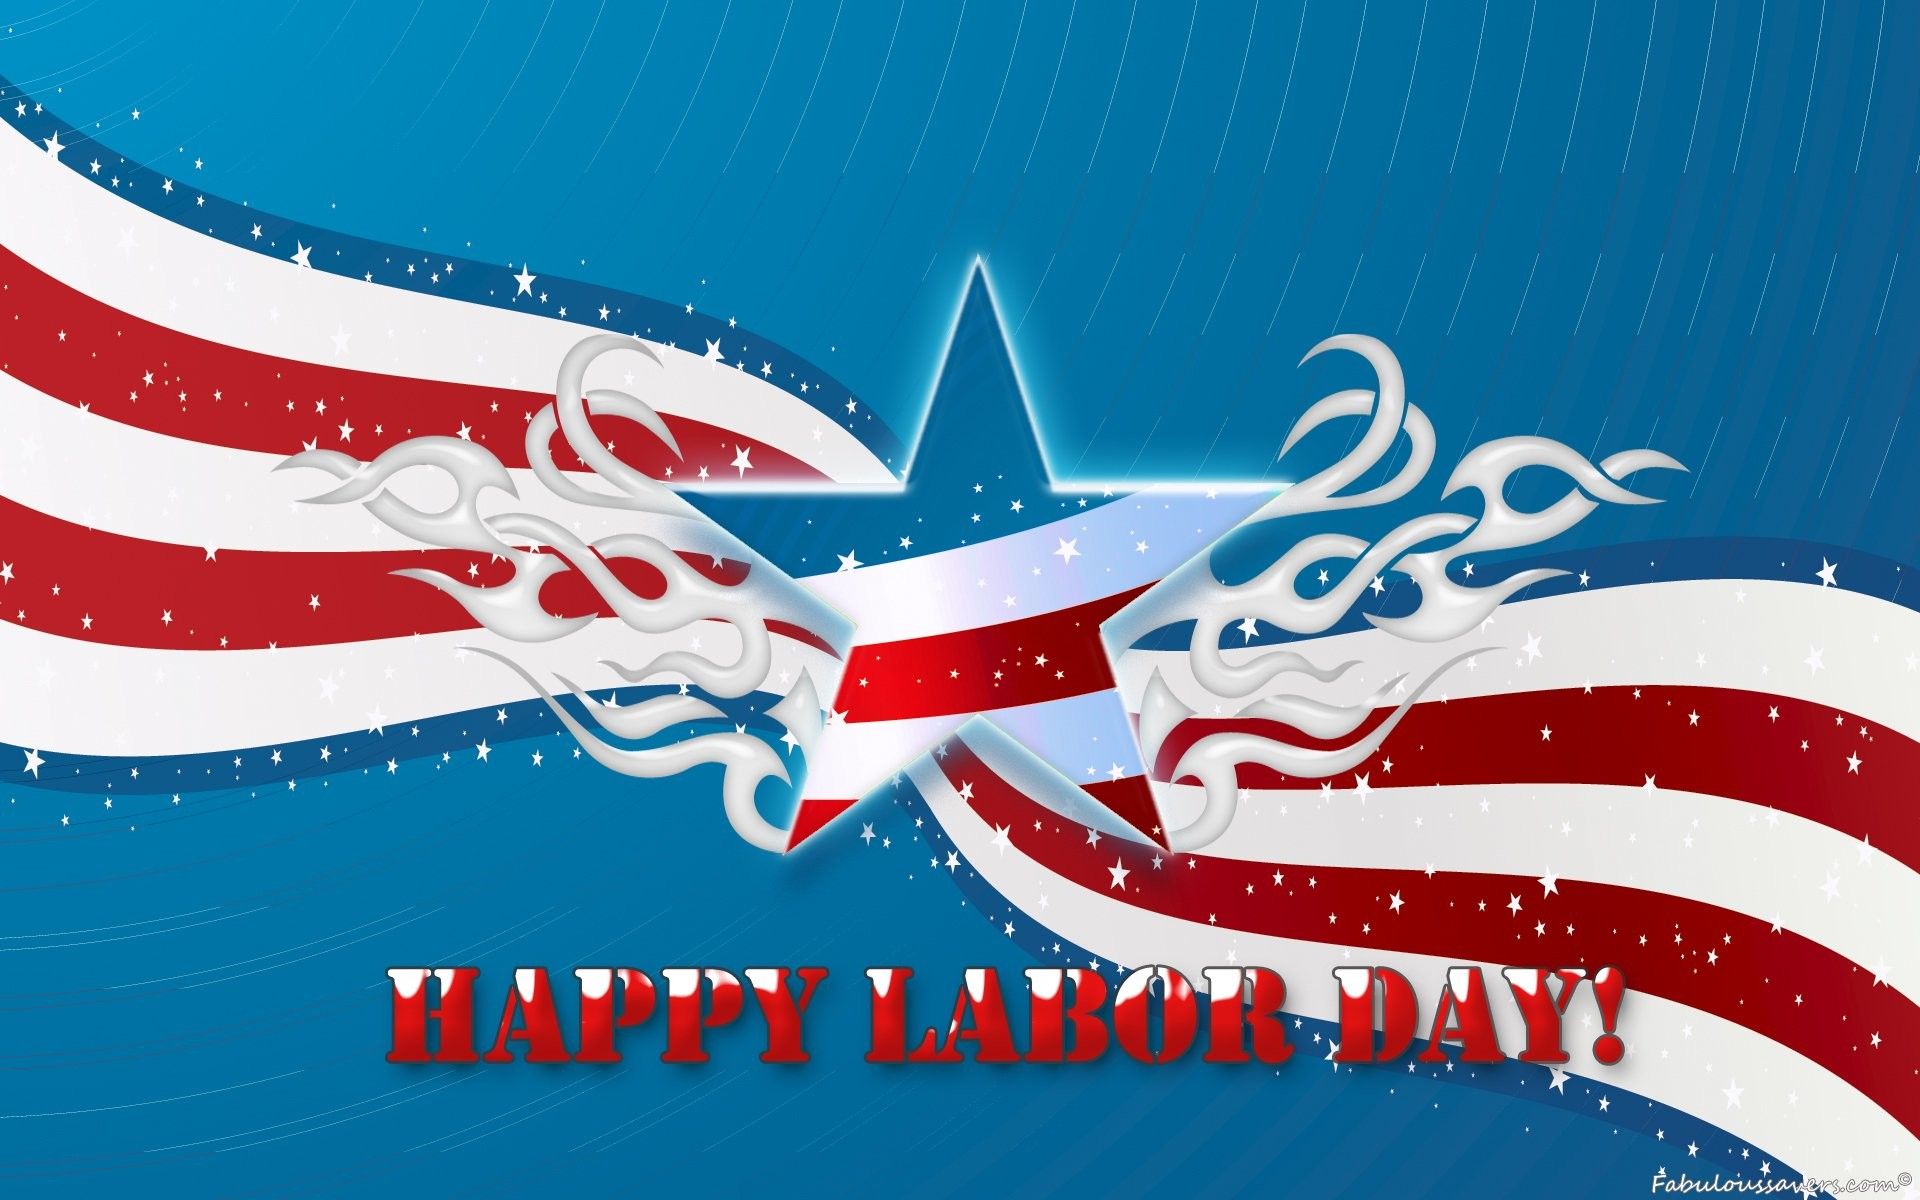 Happy Labor Day 2020 Image, HD Wallpaper, Picture Download